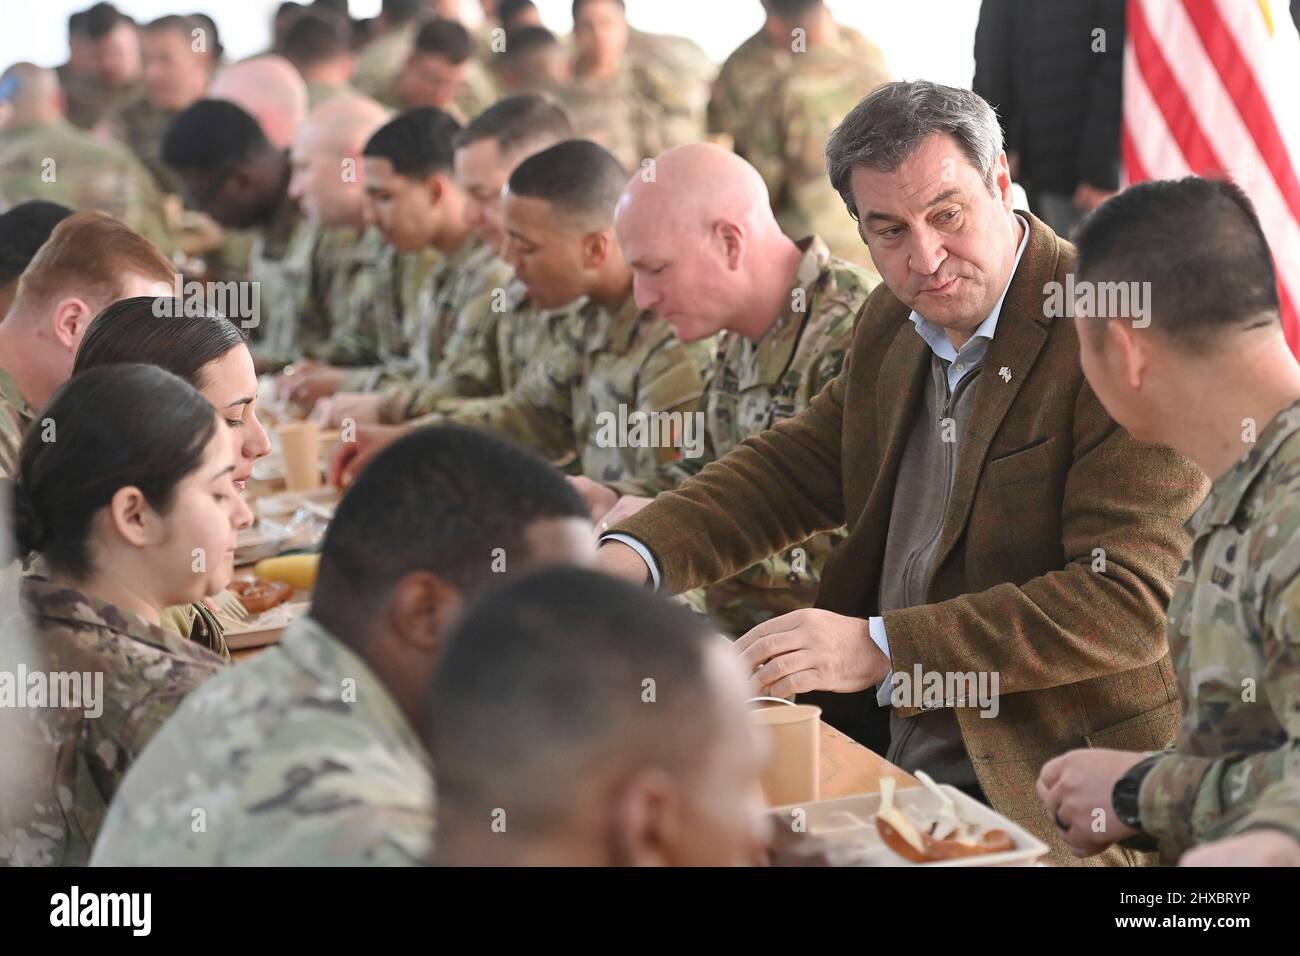 Markus SOEDER (Prime Minister of Bavaria and CSU Chairman) speaks to American soldiers on the occasion of a Weisswurst meal, Bavarian Weisswurst Fruehstueck Prime Minister Dr. Markus Soeder visits the US military training area Grafenwoehr, headquarters of the 7th Army Training Command on March 11th, 2022. Stock Photo